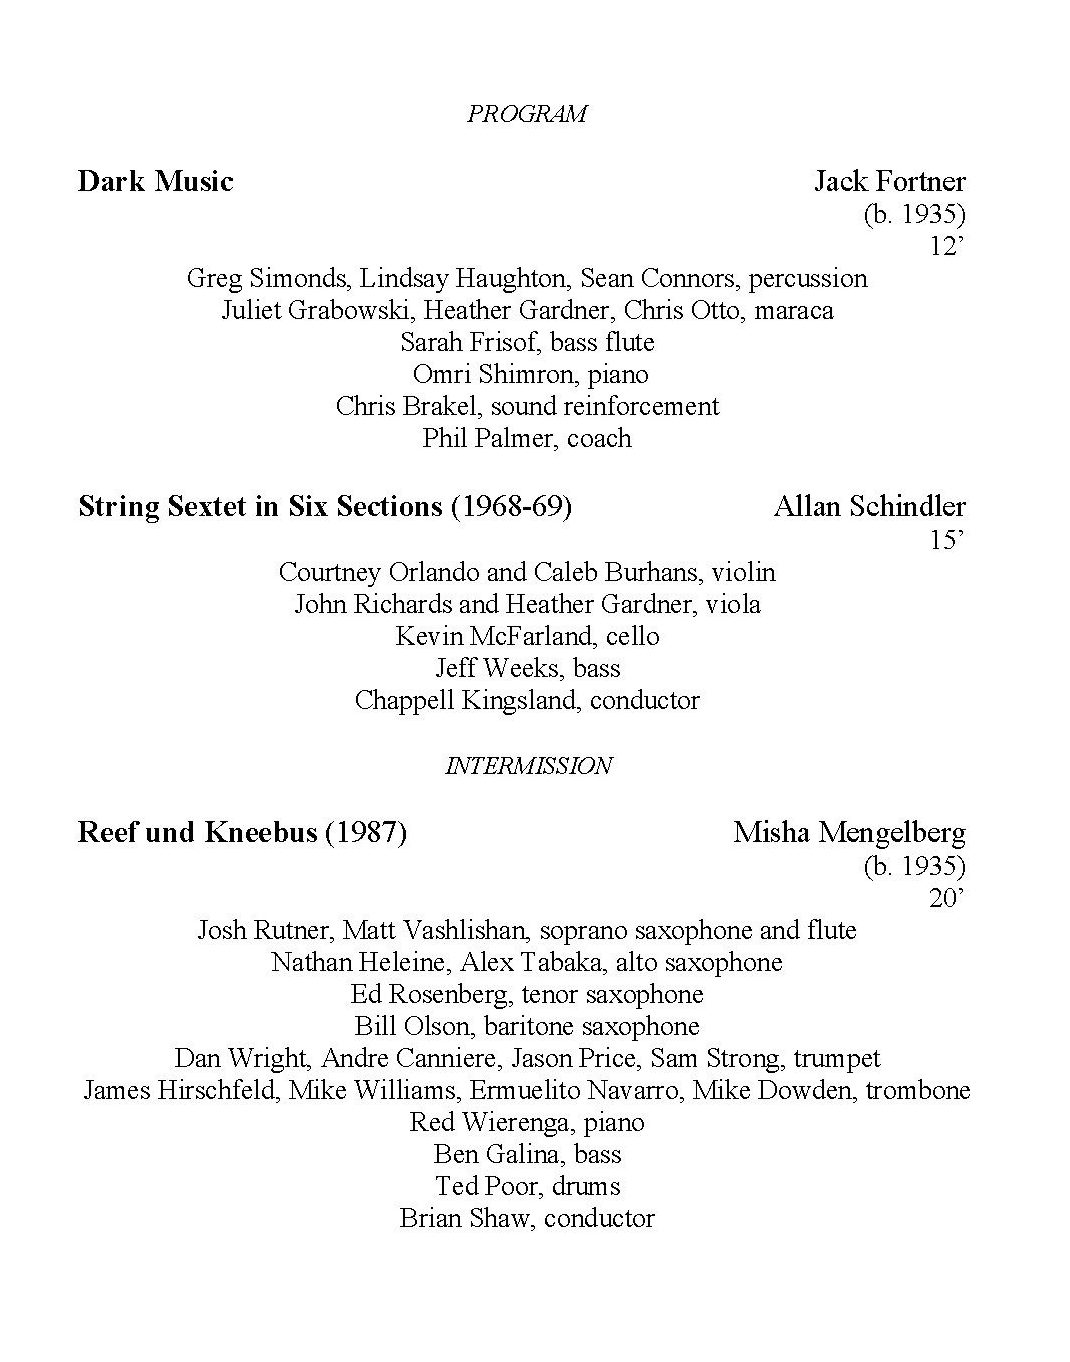 OSSIA concert program (March 21, 2003), page 2